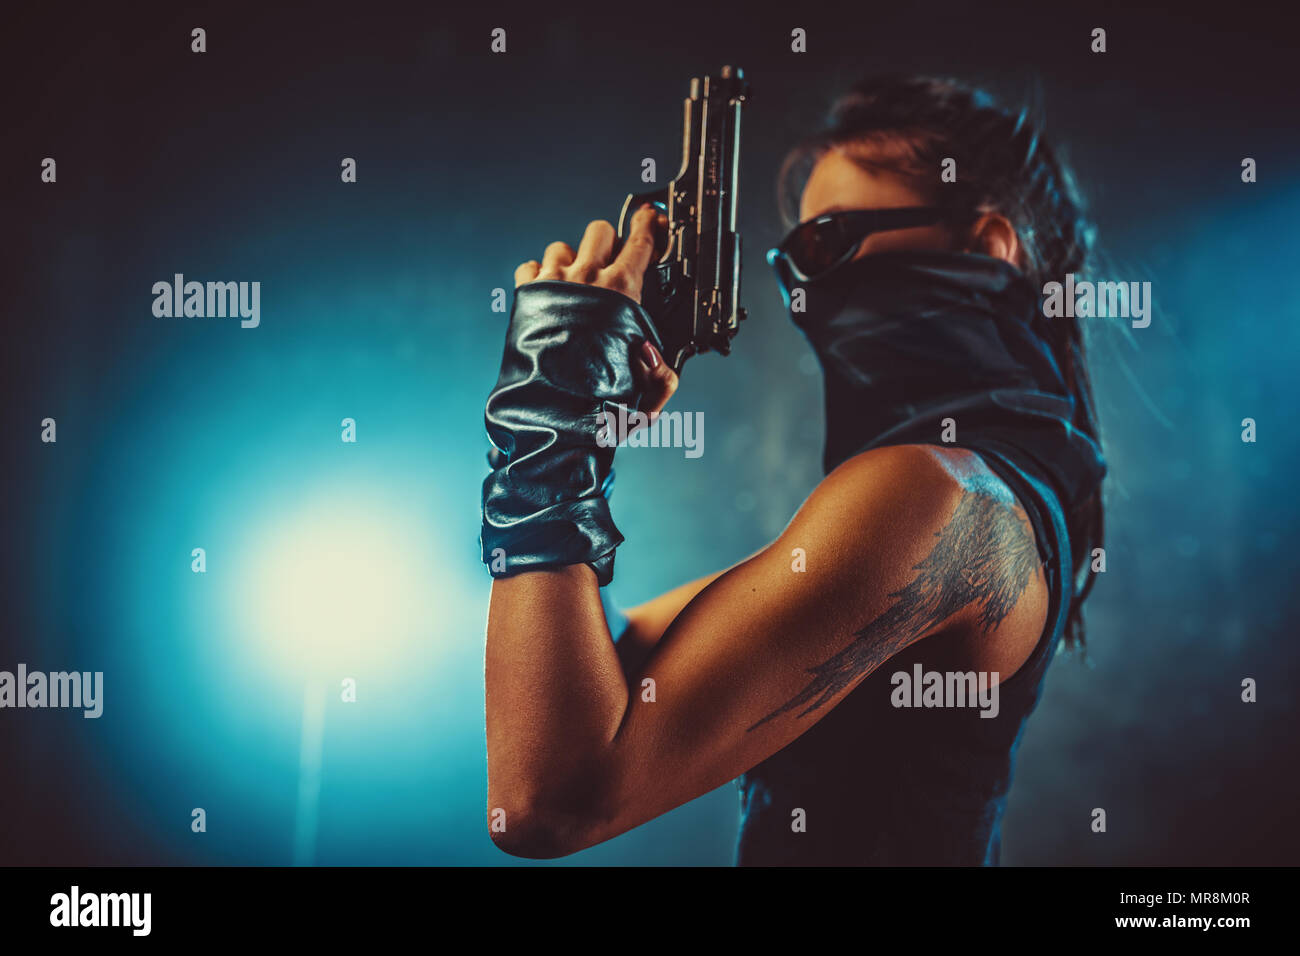 Dangerous woman fighter with gun and scarf in dark interior with smoke. Tattoo on body. Stock Photo